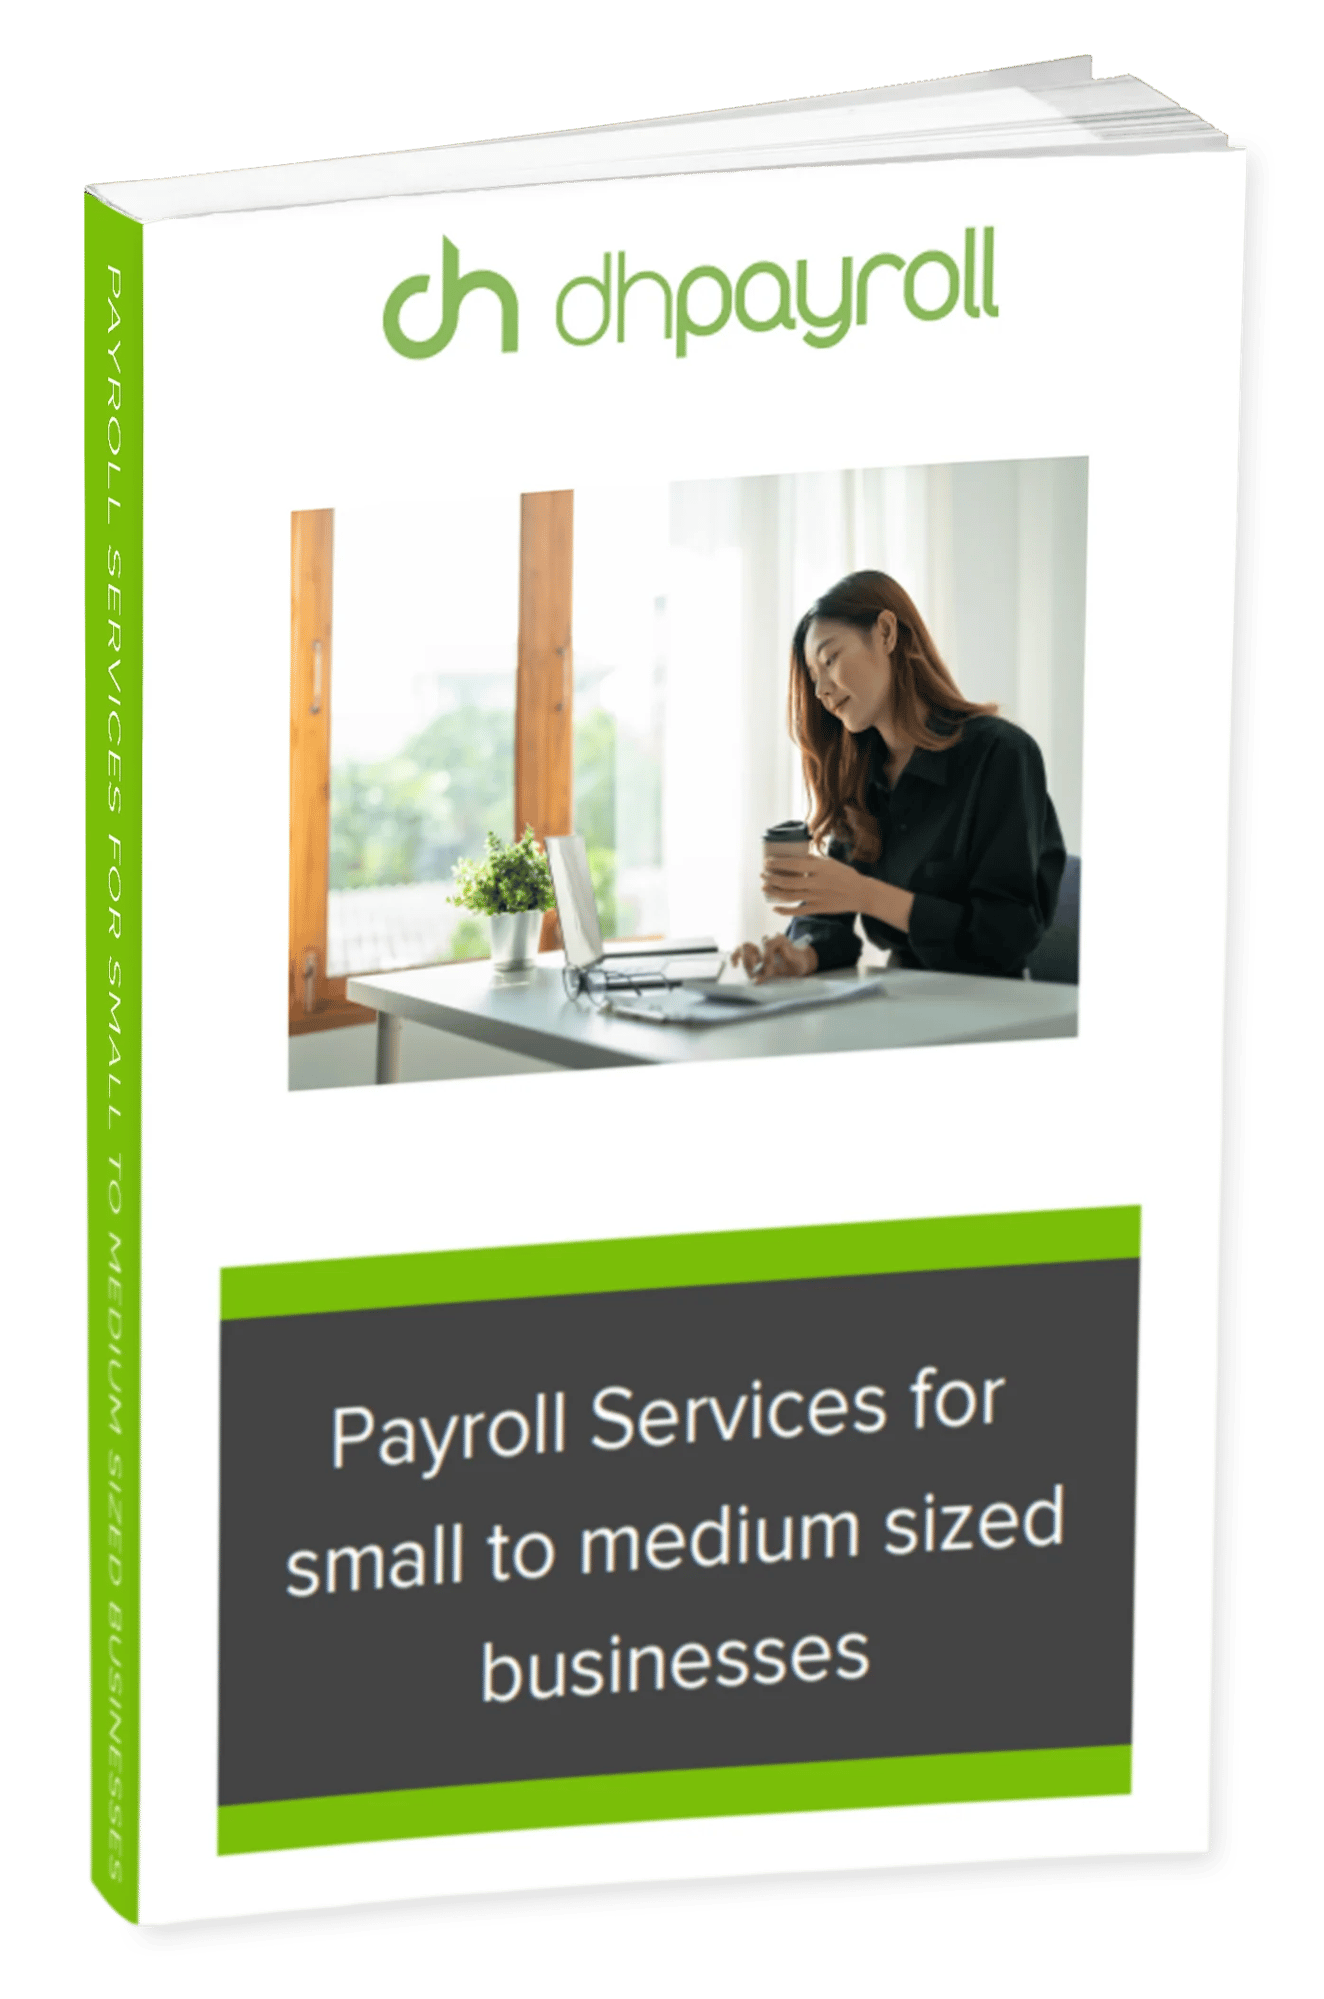 Payroll Services for small to medium sized businesses